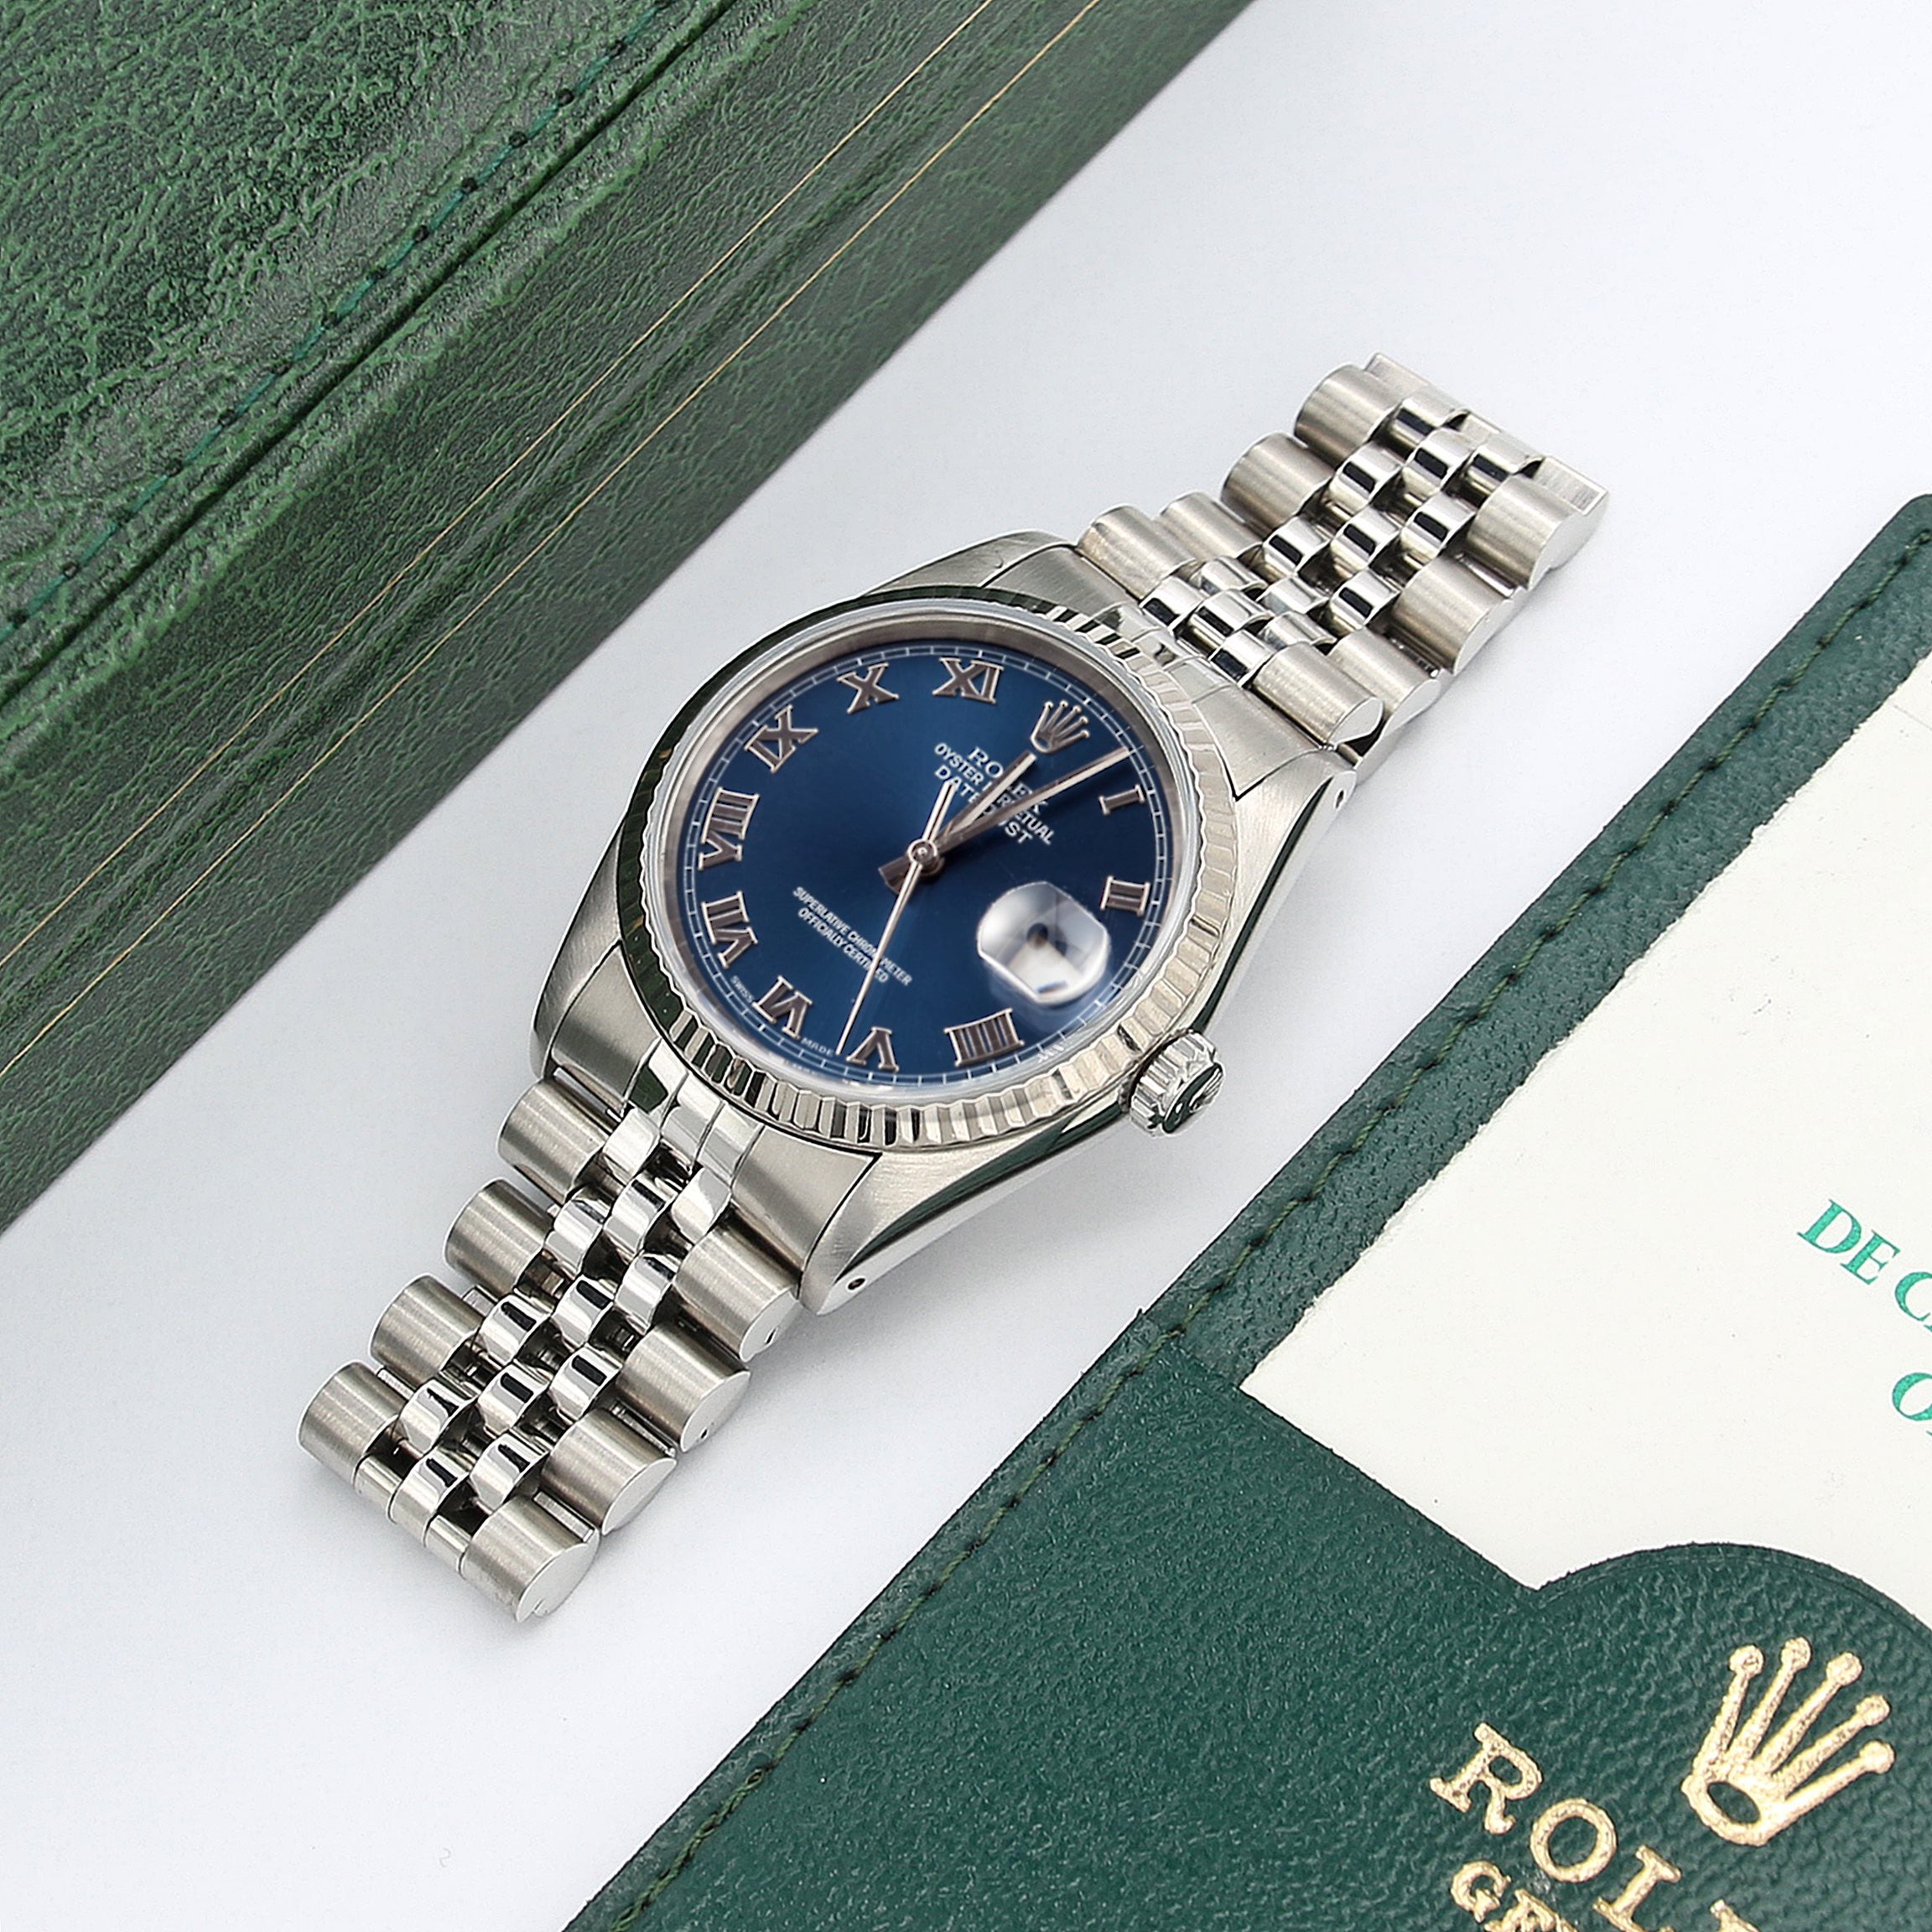 Rolex Datejust 36 ref. 16234 Blue Roman Dial - With Papers